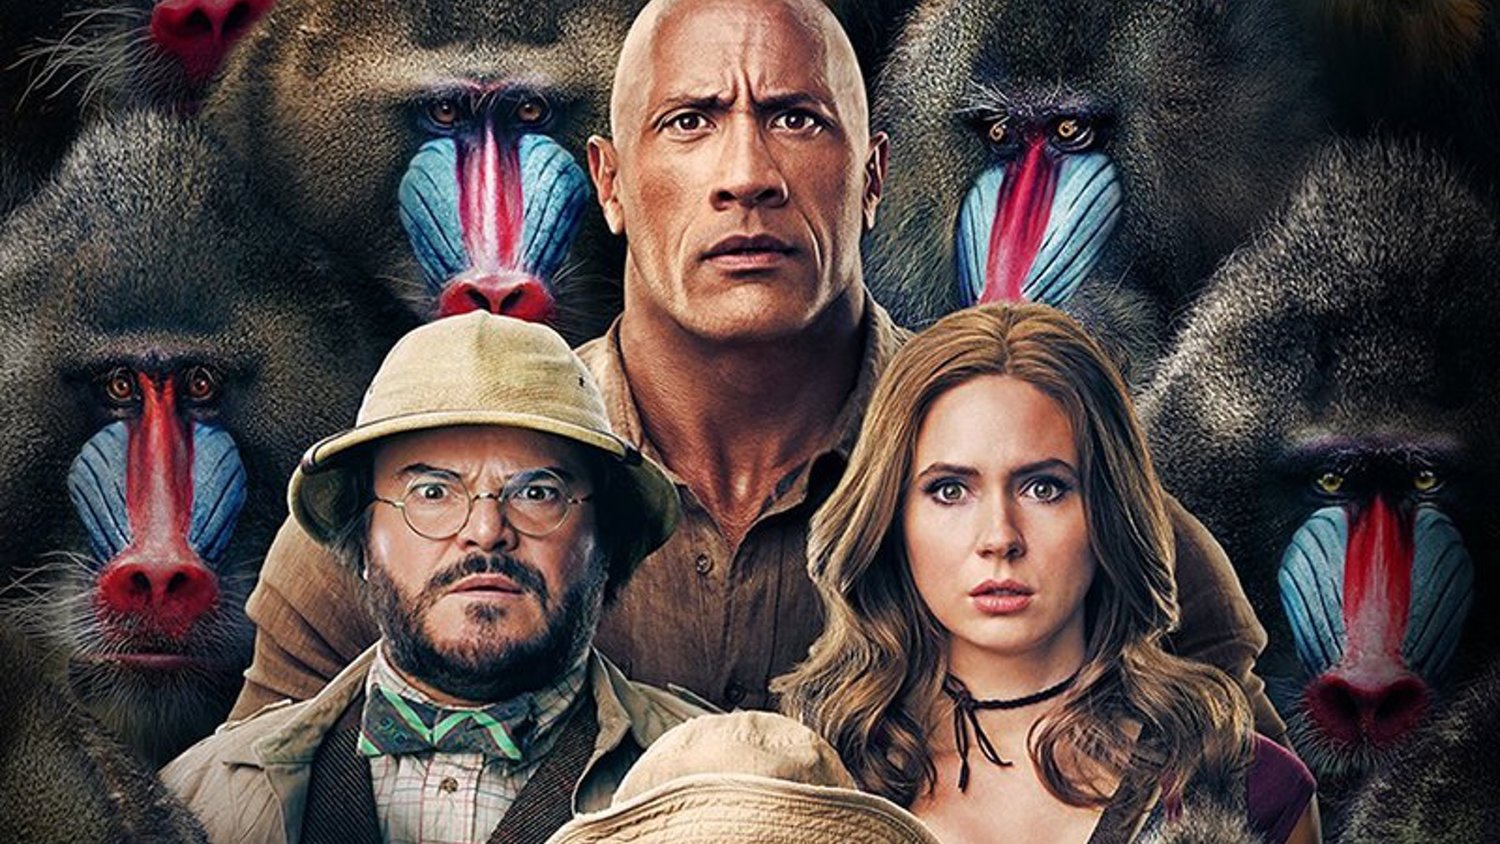 JUMANJI: THE NEXT LEVEL Gets an IMAX Poster and Means Monkey Business.